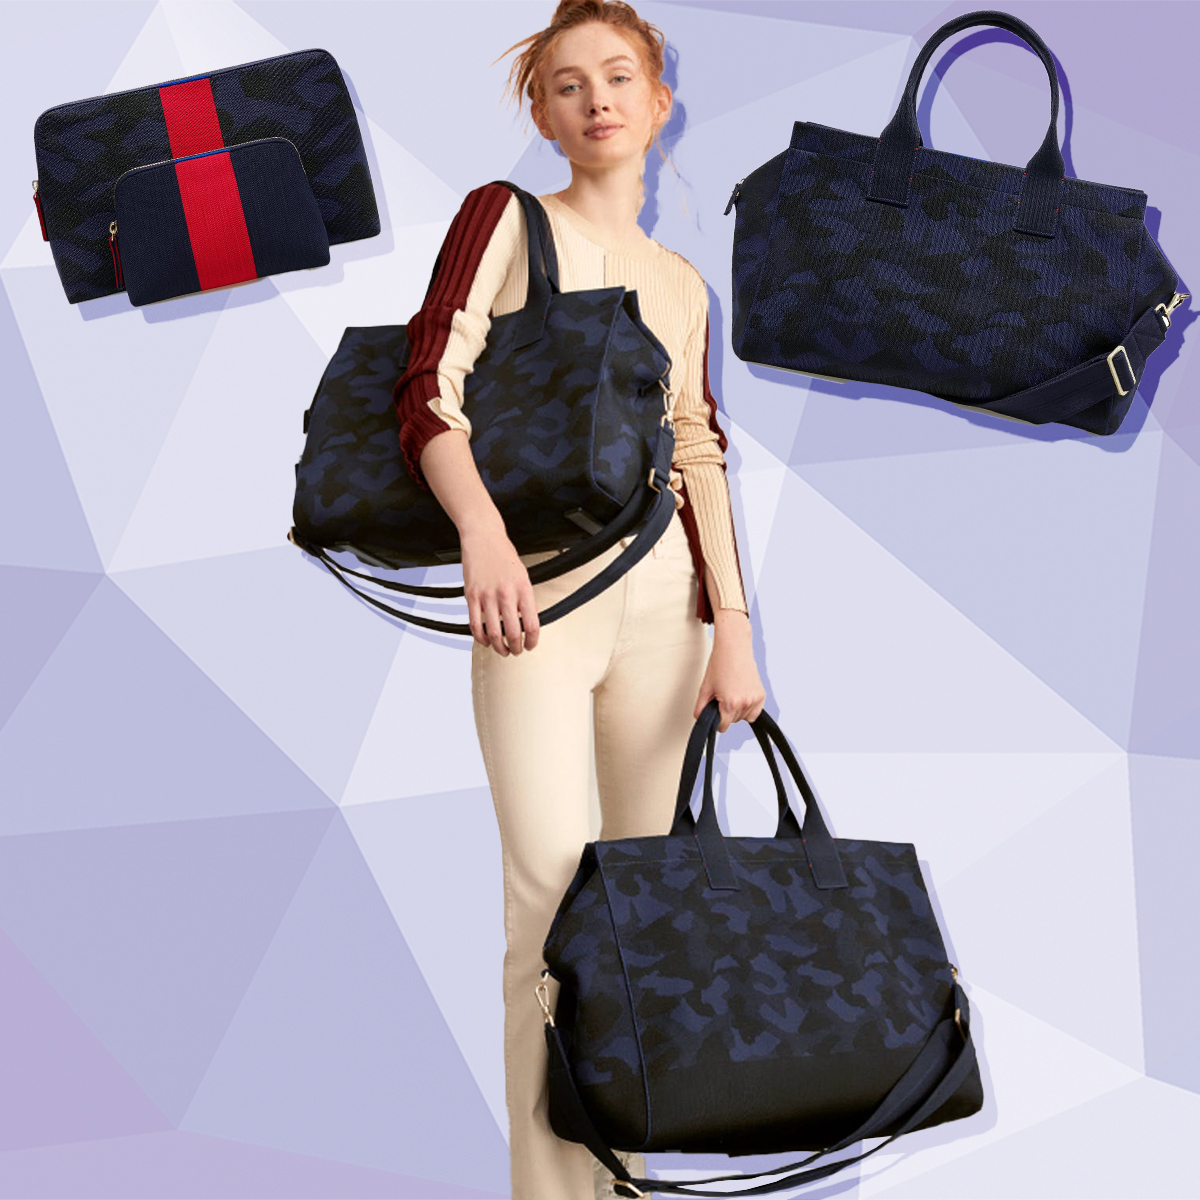 Make a Stylish Getaway With Rothy's New Travel Bag Collection